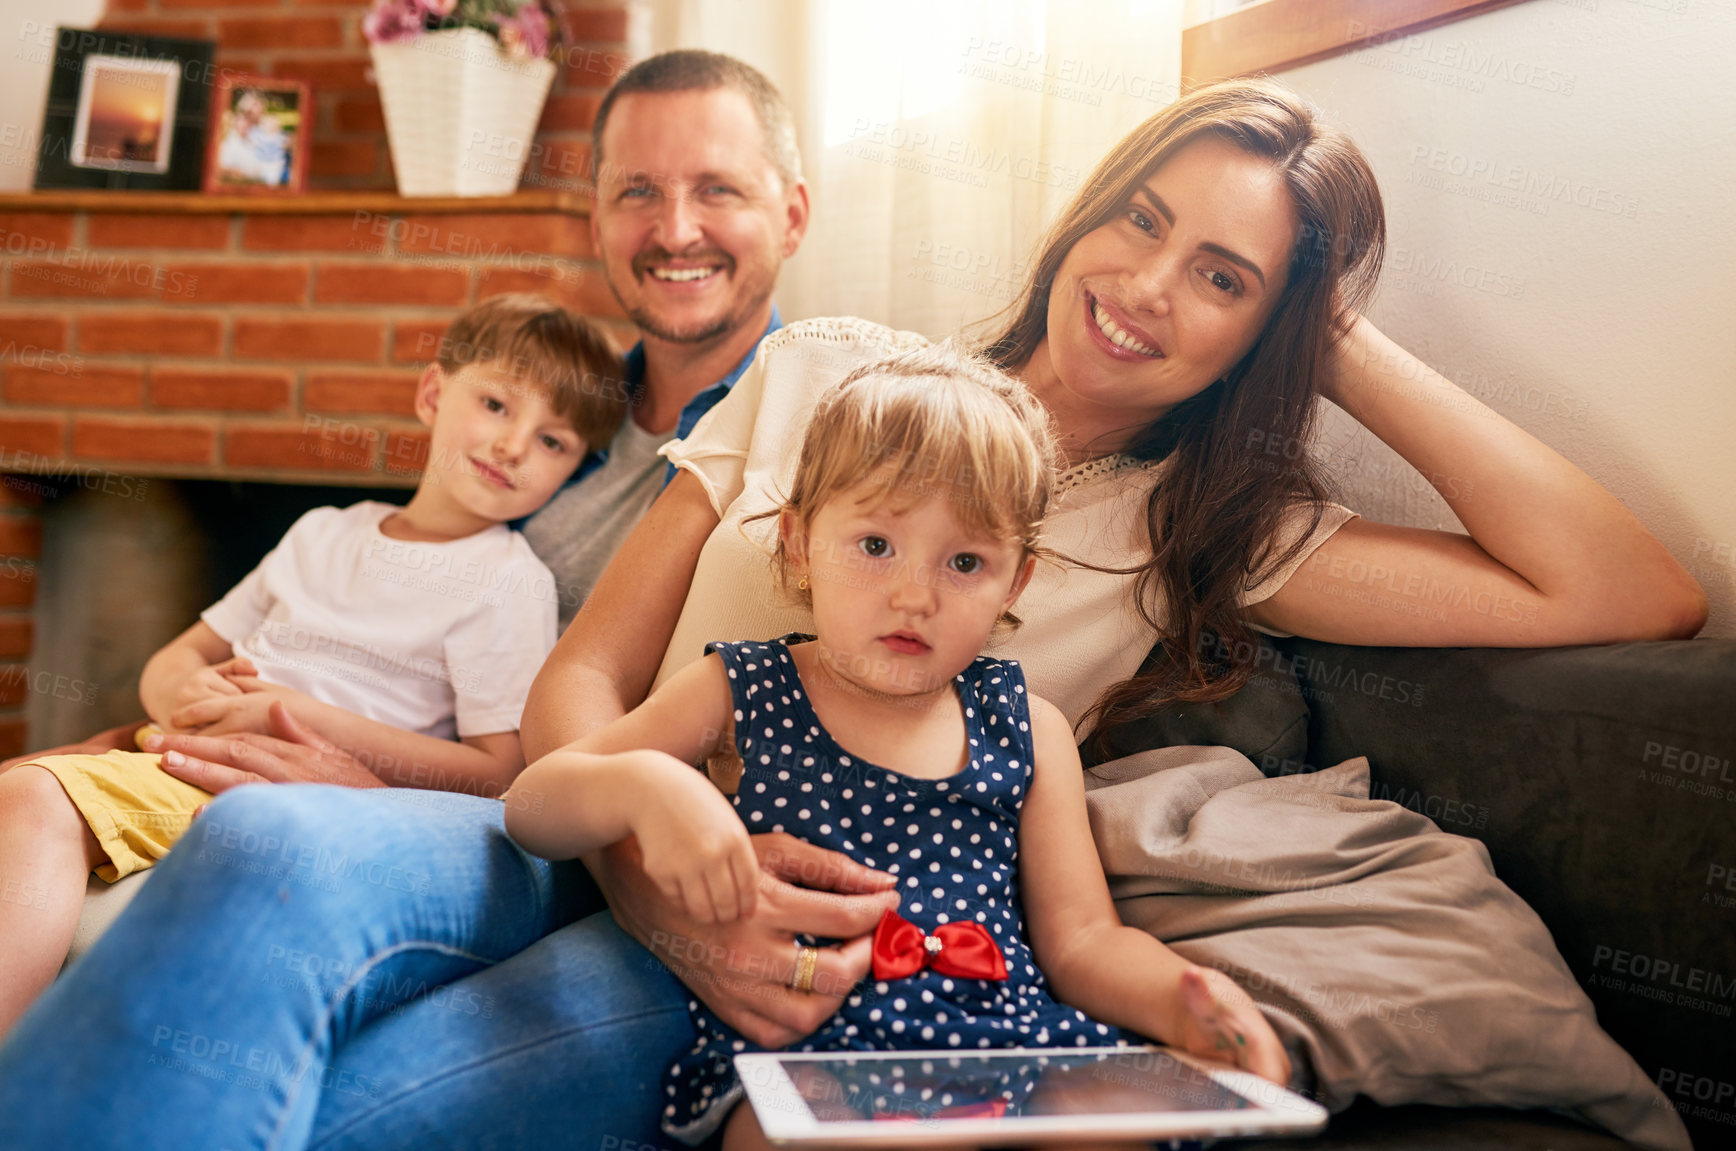 Buy stock photo Portrait of a happy young family of four relaxing together on the sofa at home